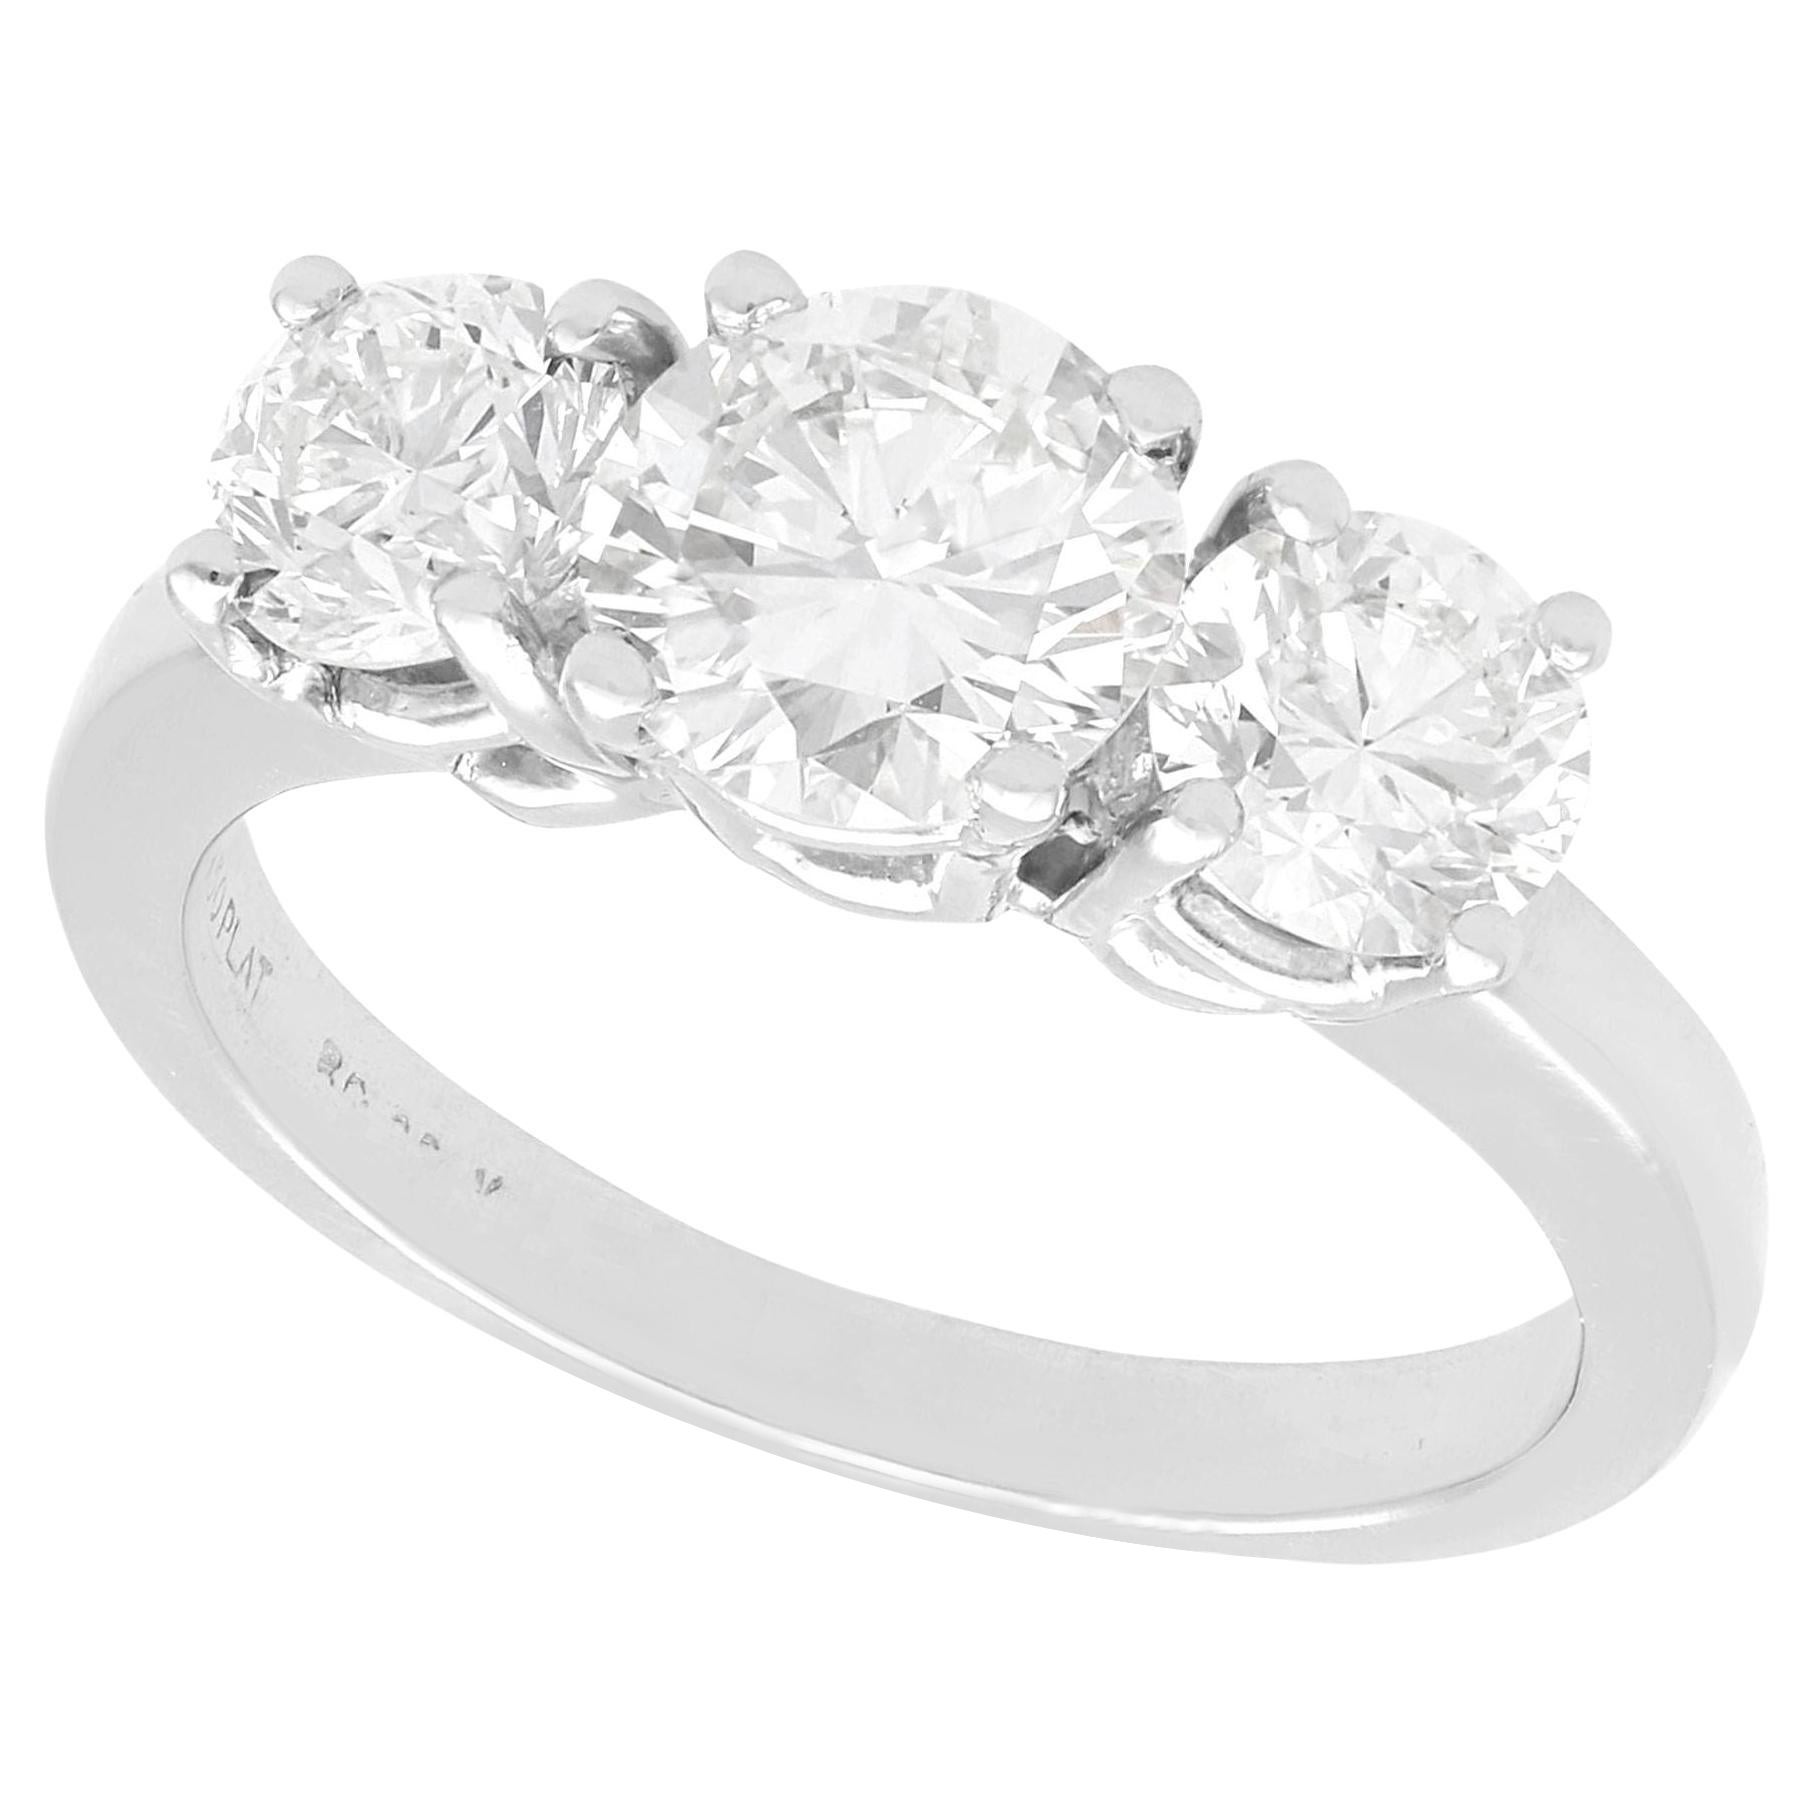 2.49 Carat Diamond and Platinum Trilogy Engagement Ring For Sale